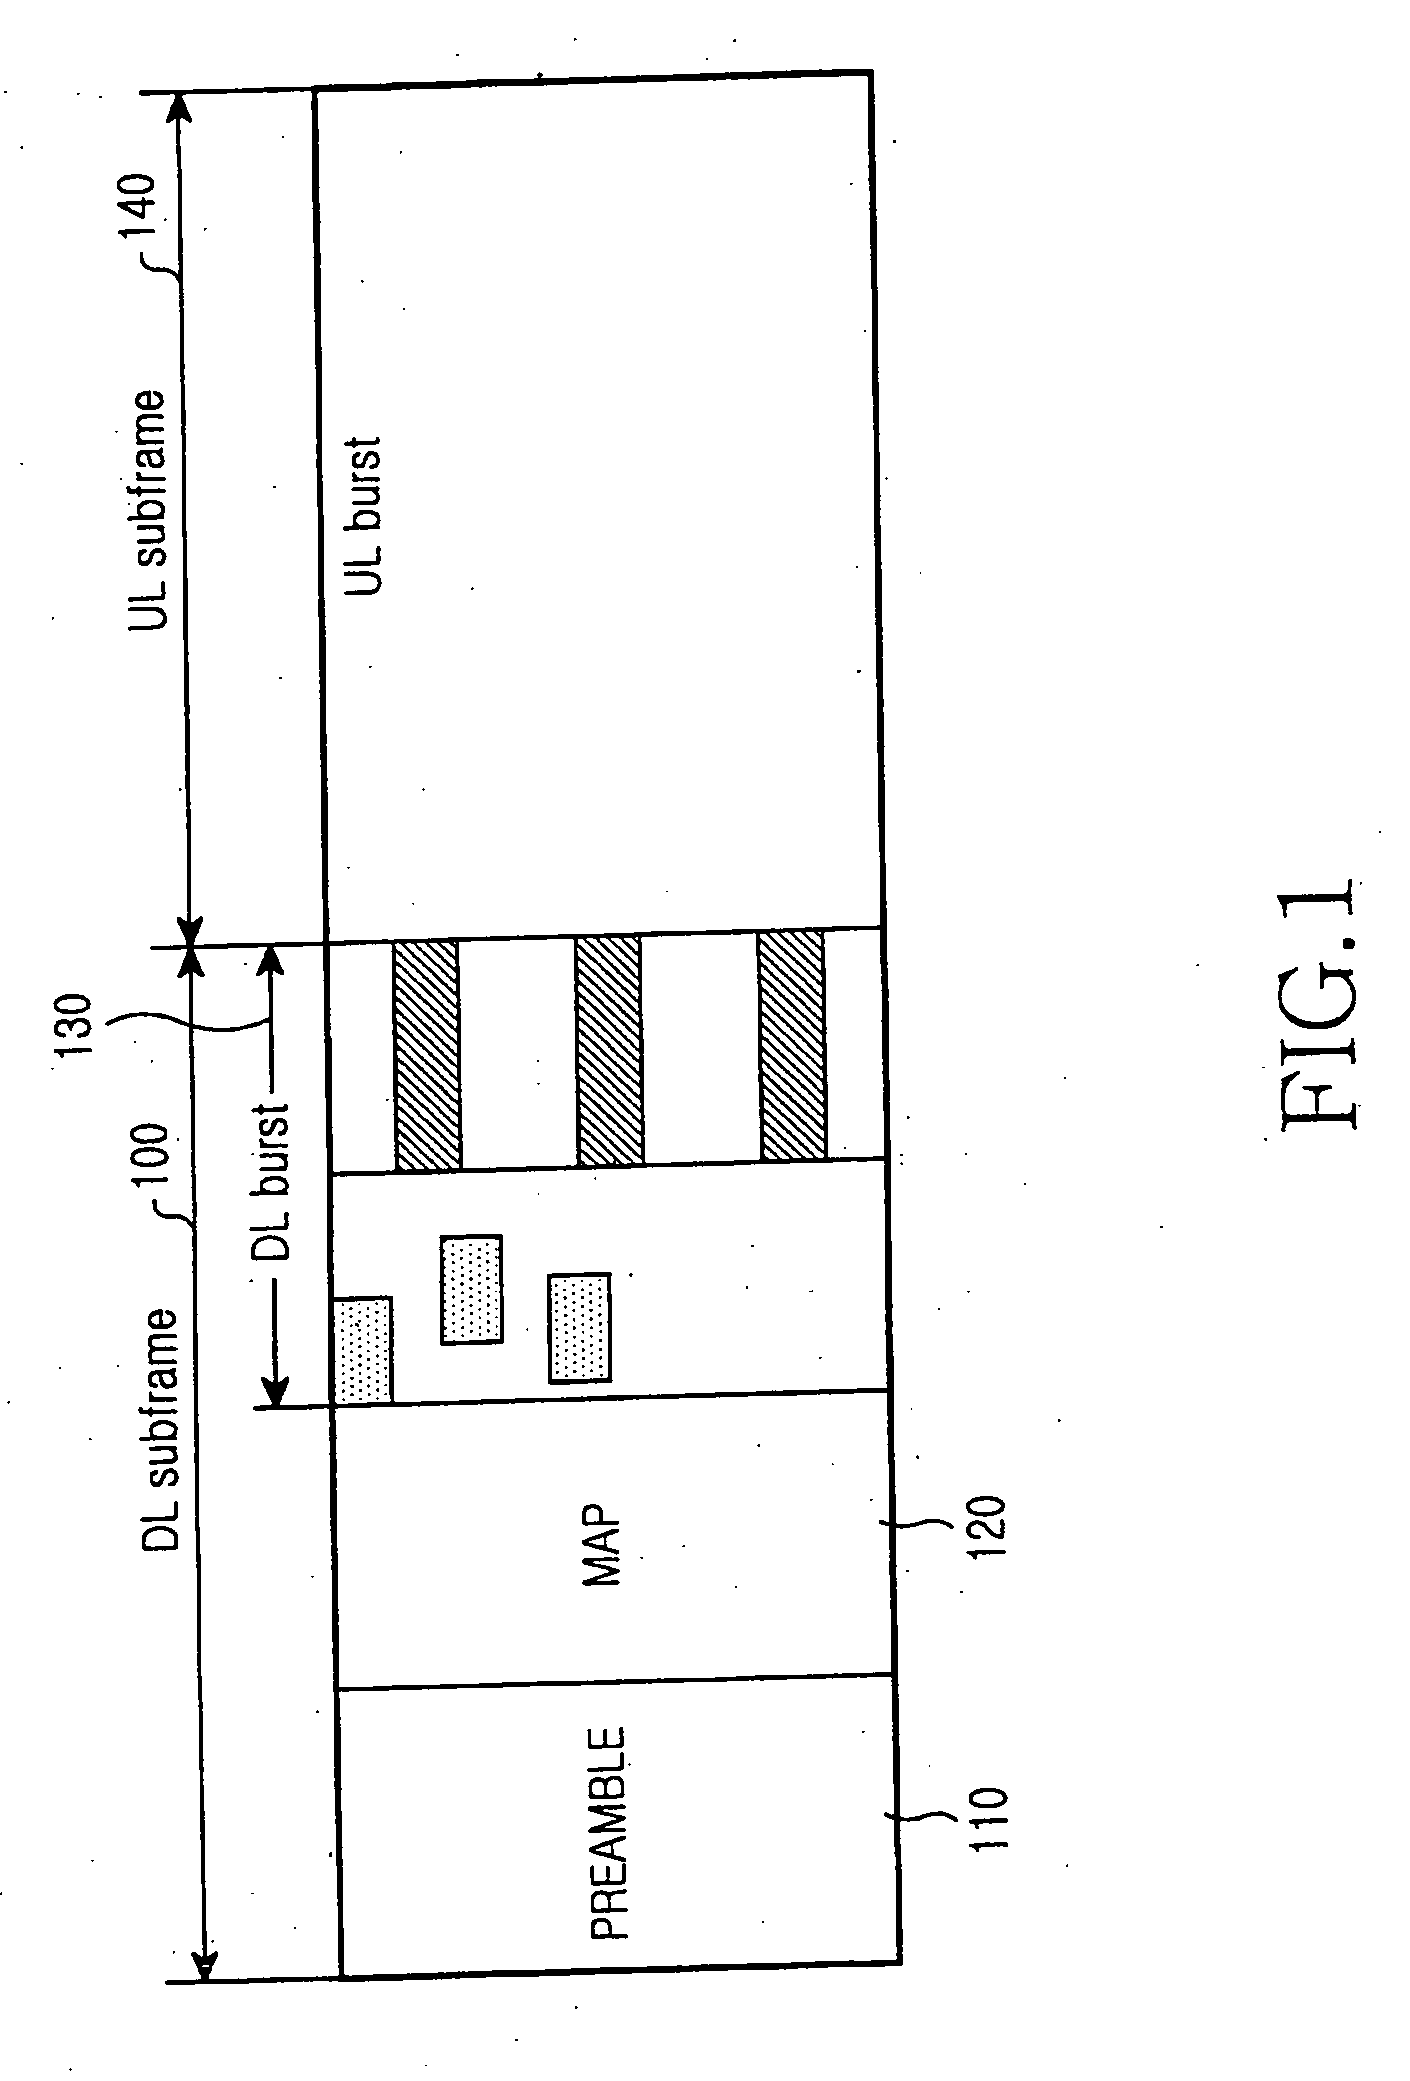 System and method for assigning a sub-channel in a BWA communication system